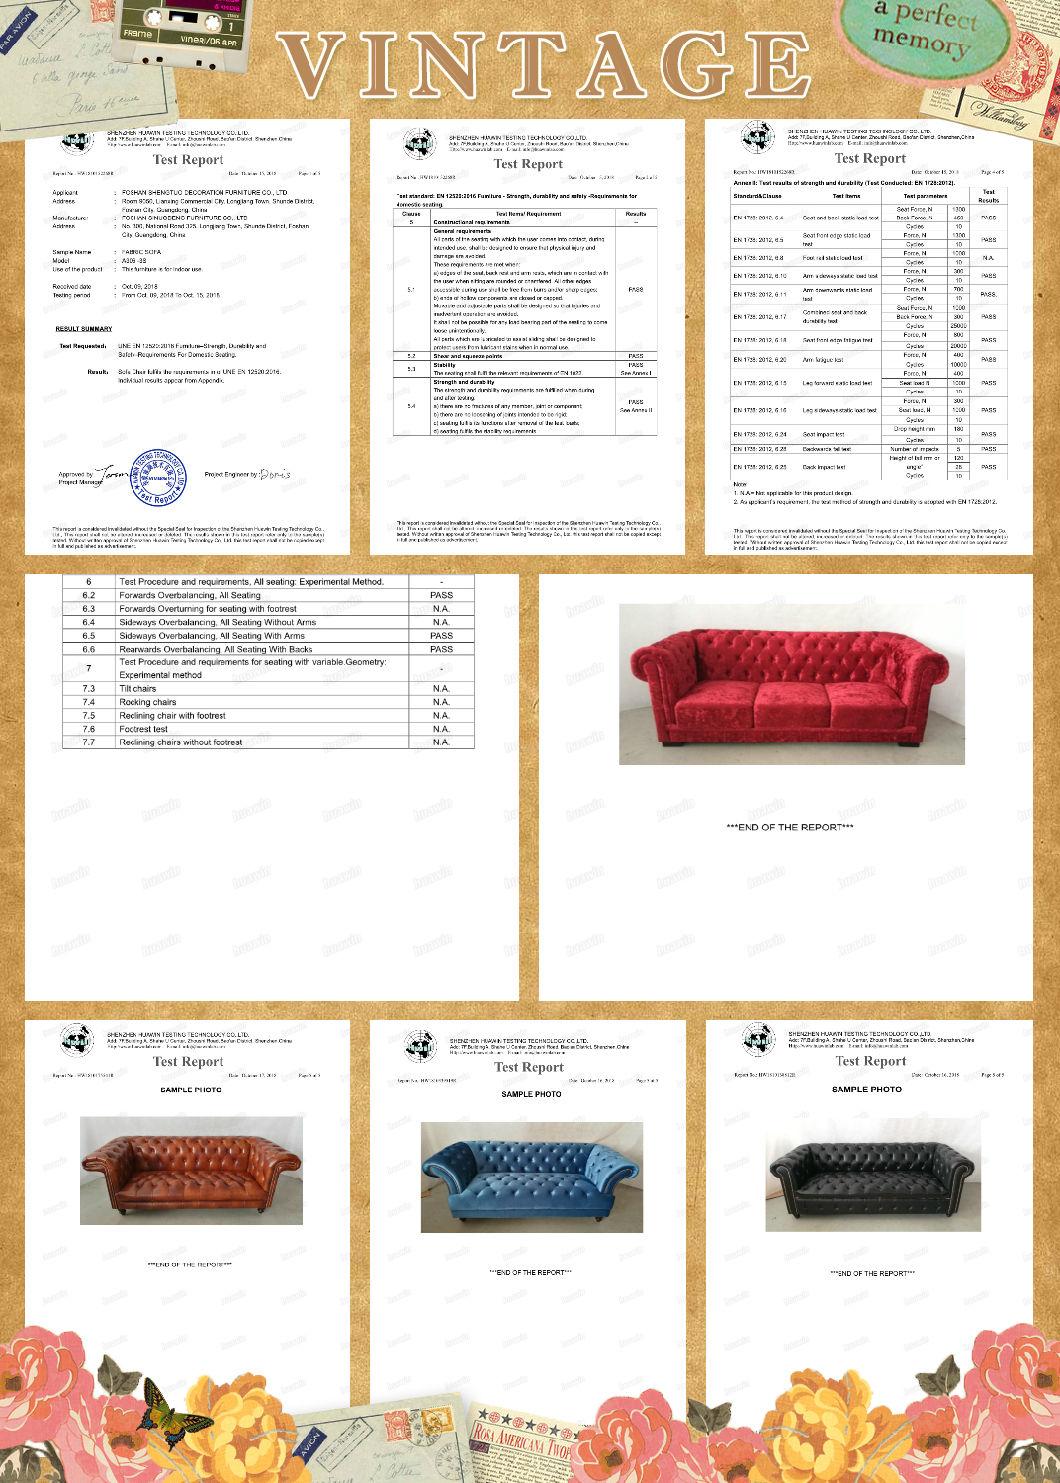 Modern Chesterfield Leather Home Furniture Top Grain Leather Fabric PU PVC 1 2 3seater Sample Design Living Room Sofa